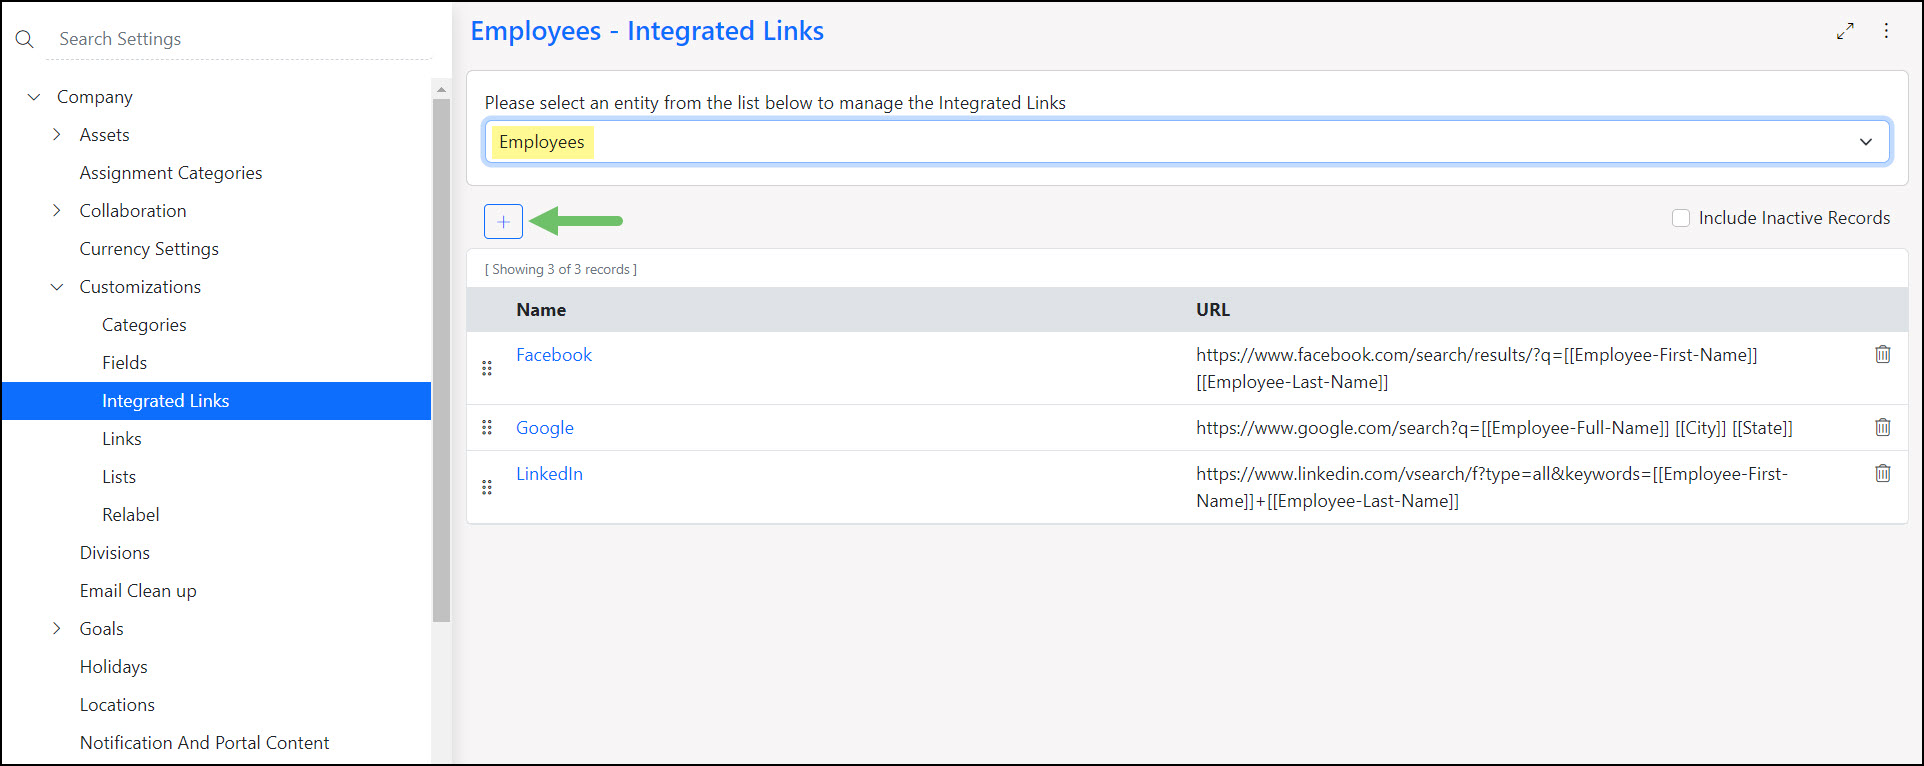 Image of the Integrated Links section of Company Settings within Striven